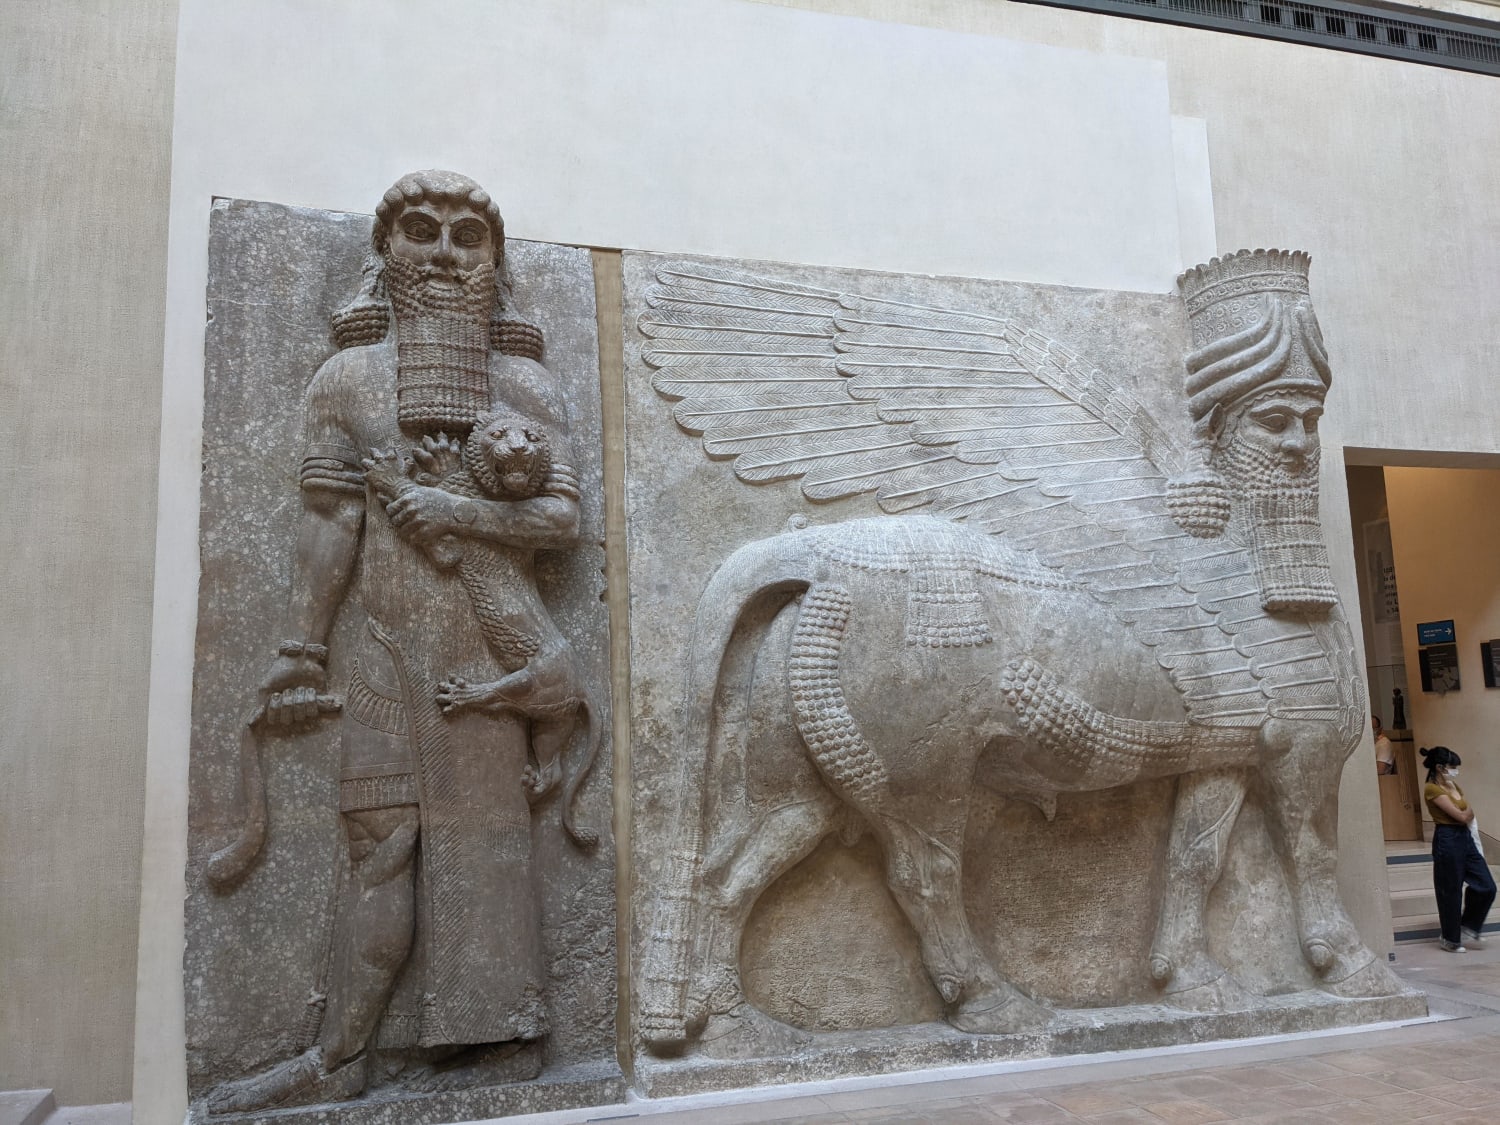 The size of these Near East reliefs in the Louvre is insane